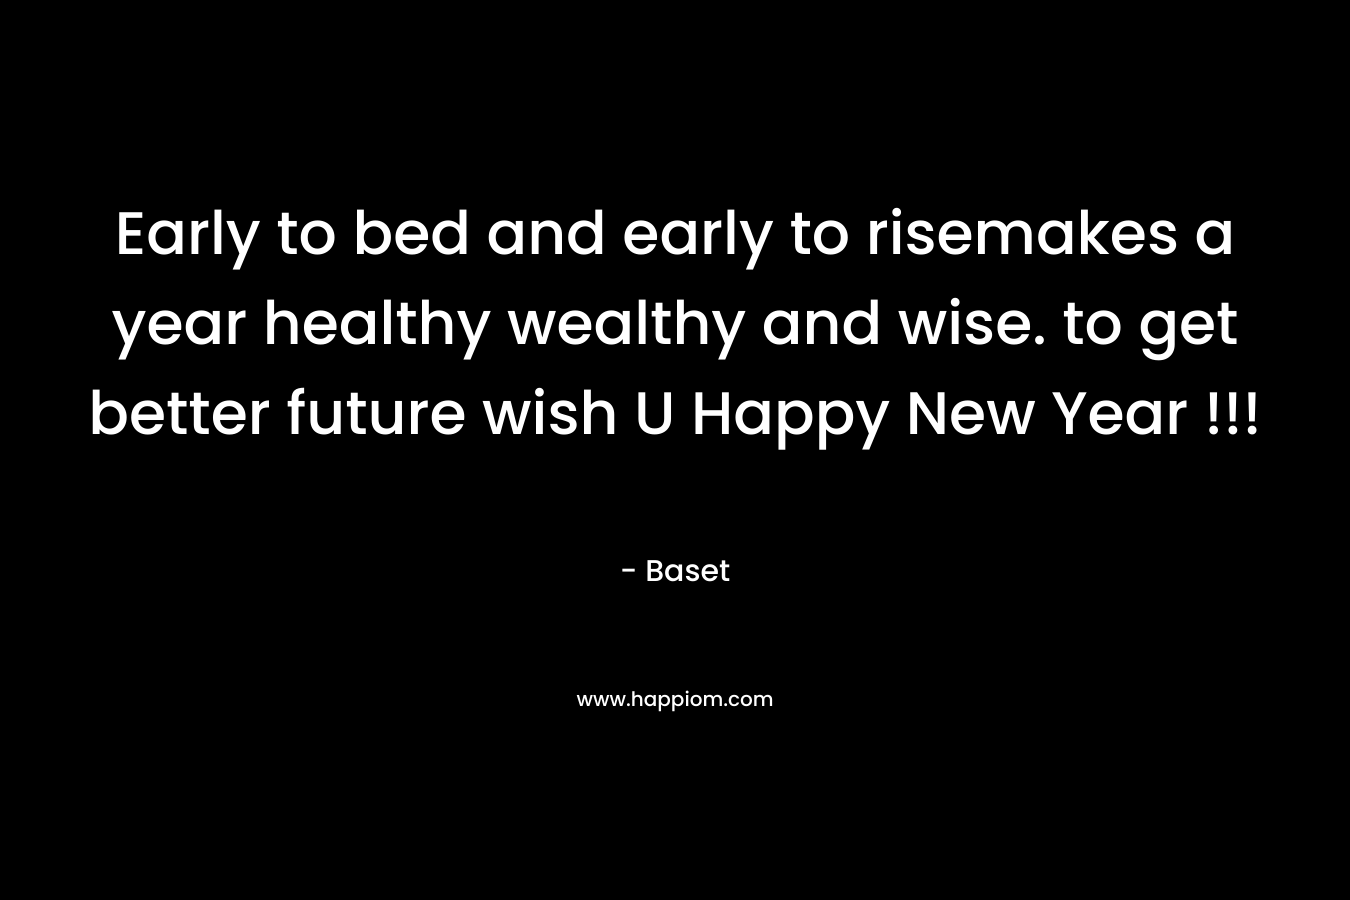 Early to bed and early to risemakes a year healthy wealthy and wise. to get better future wish U Happy New Year !!!